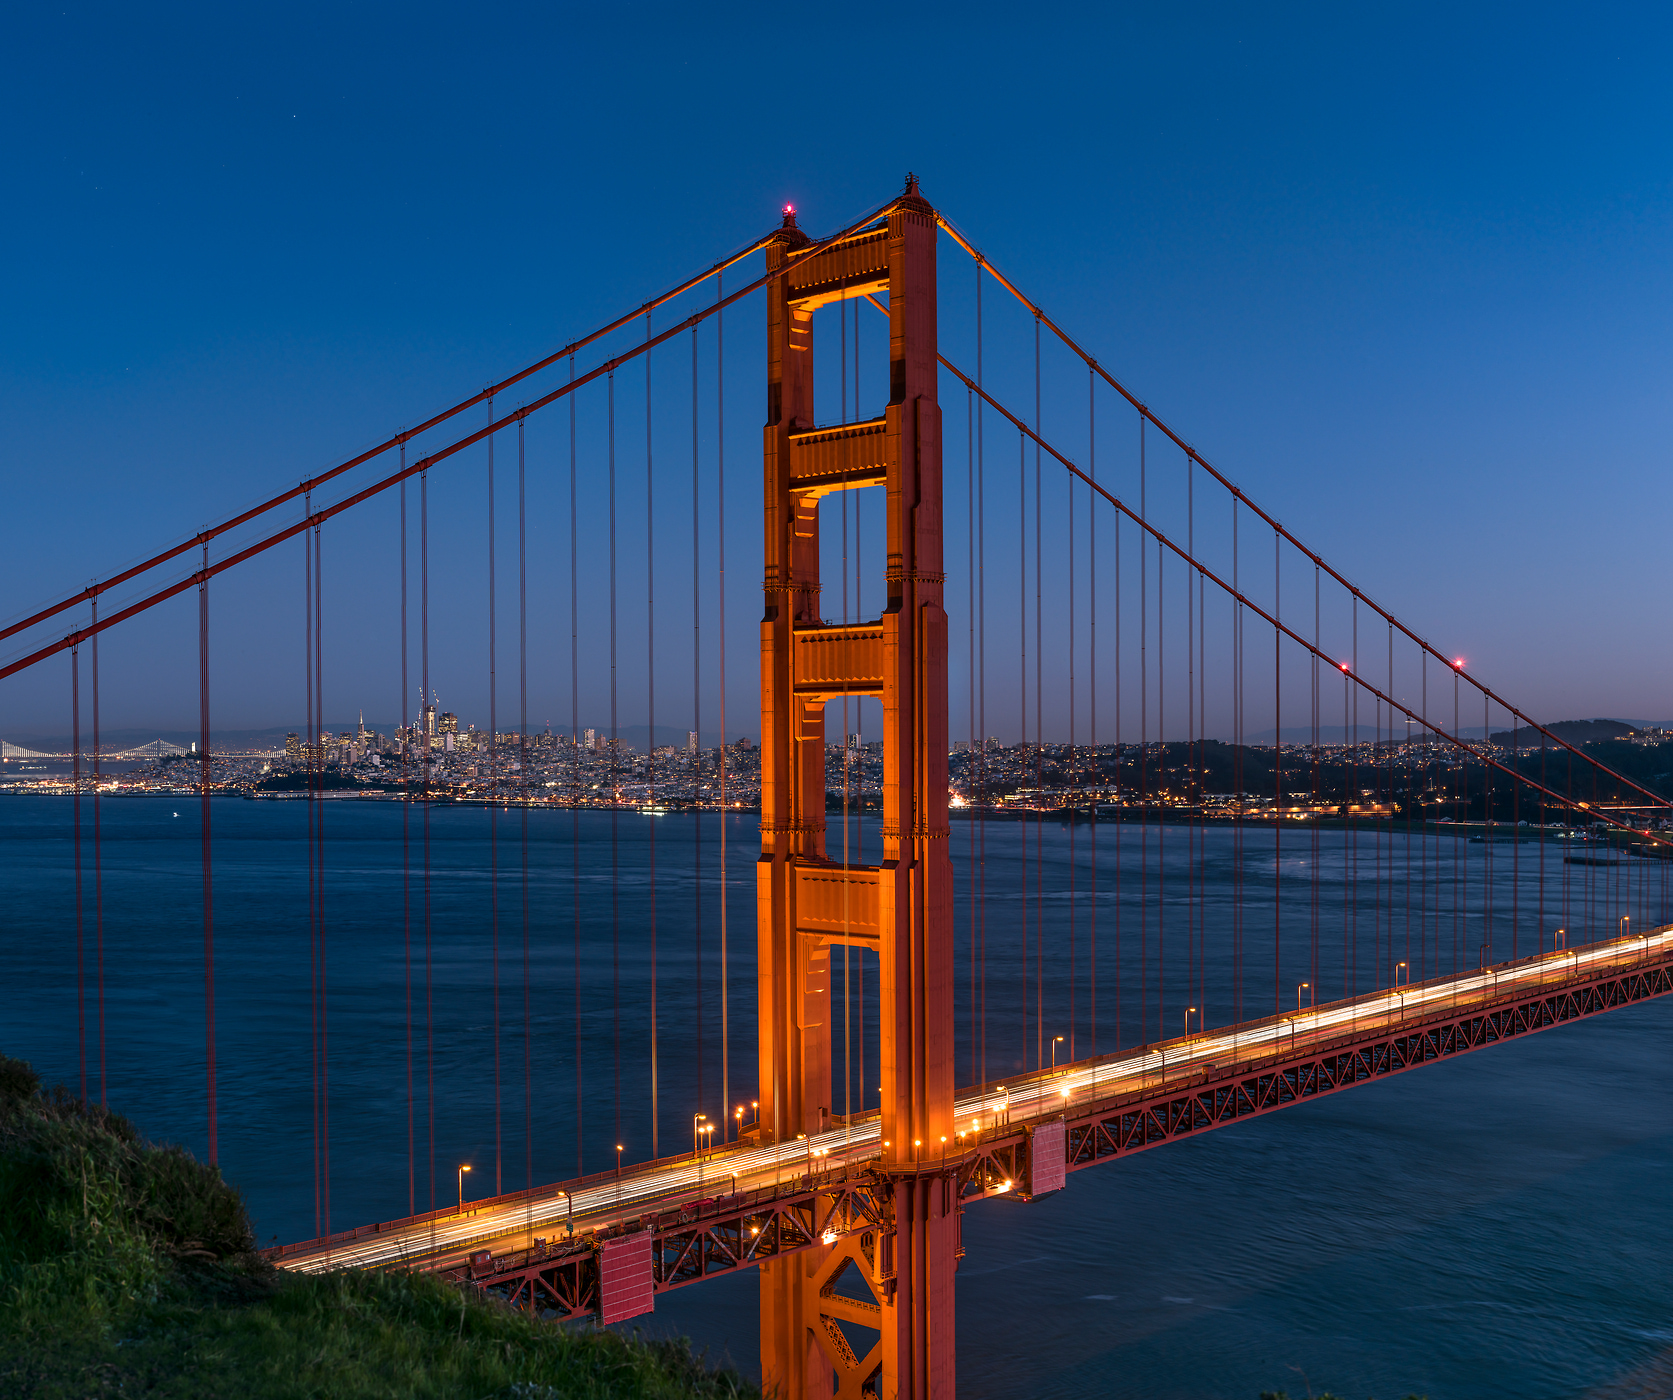 298 megapixels! A very high resolution, large-format VAST photo print of the Golden Gate Bridge, San Francisco, and the San Francisco Bay; cityscape fine art photo created by Justin Katz from Battery Spencer in Sausalito, California.